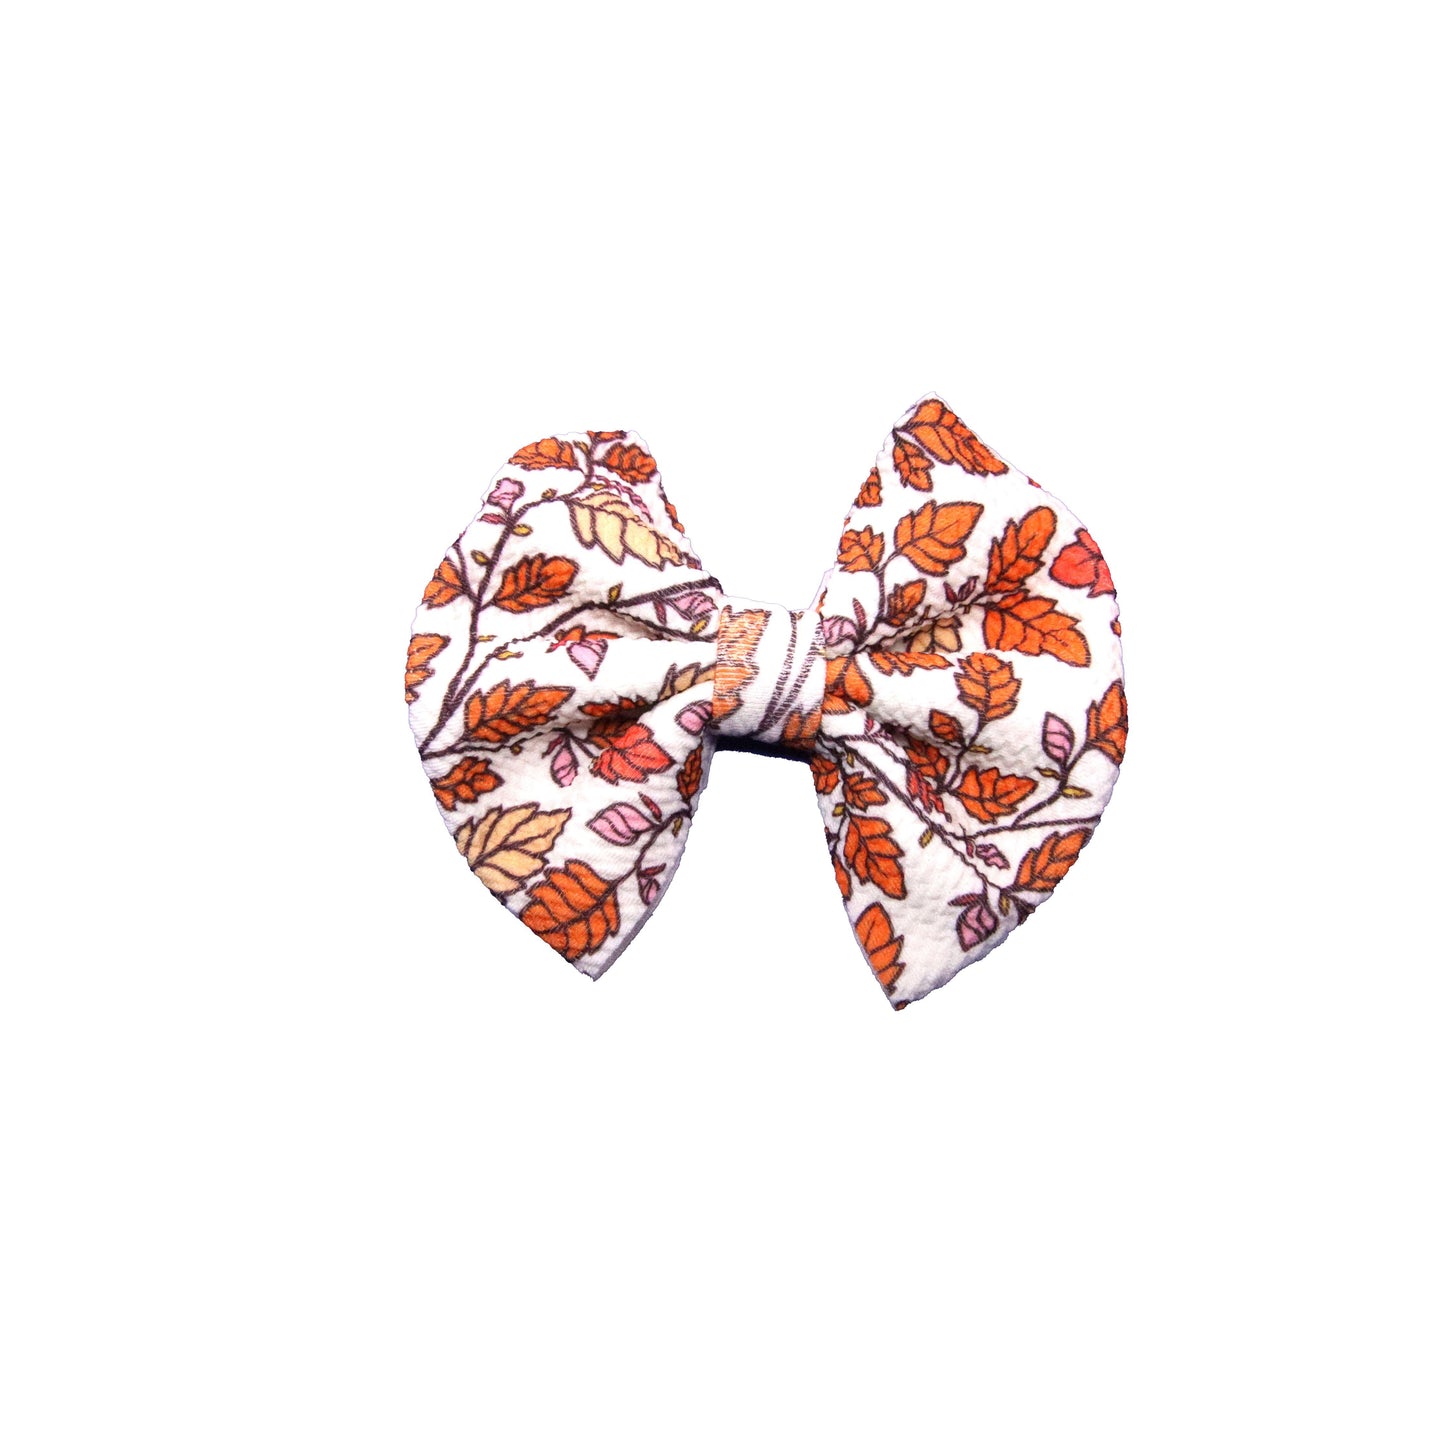 5", Bow, Hair Bow, Windblown Leaves, Fabric Bow, New Product - 04OCT2020